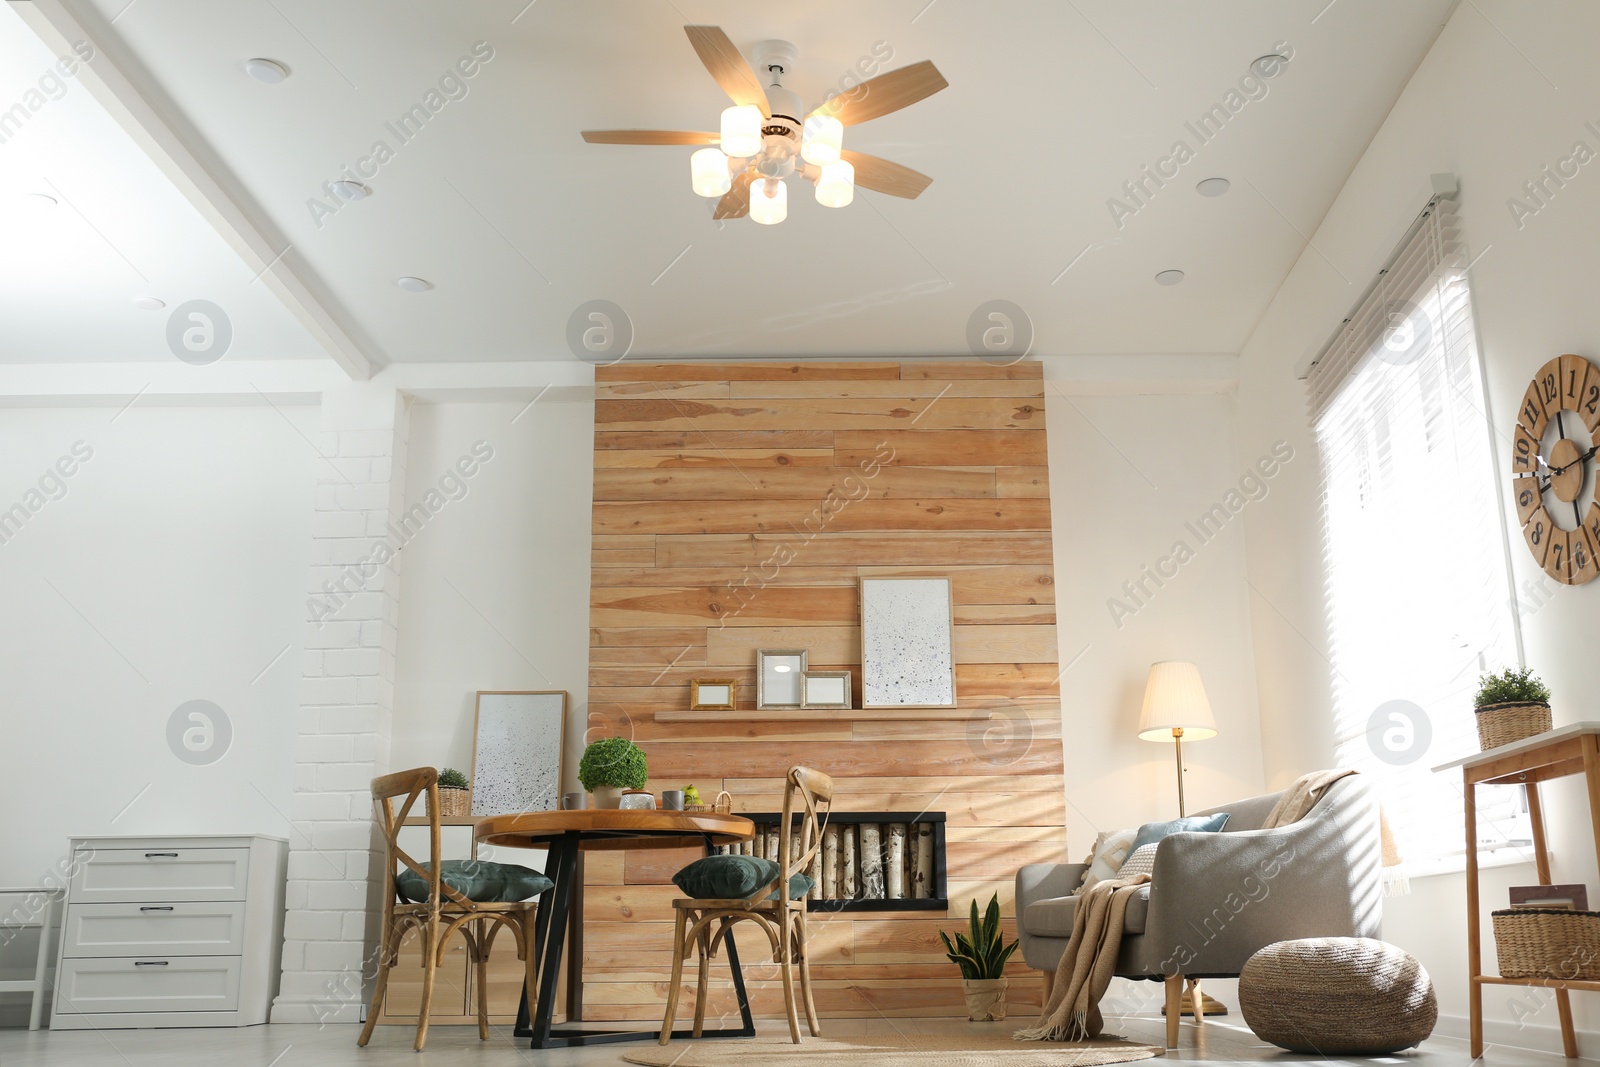 Photo of Stylish living room interior with modern ceiling fan, low angle view